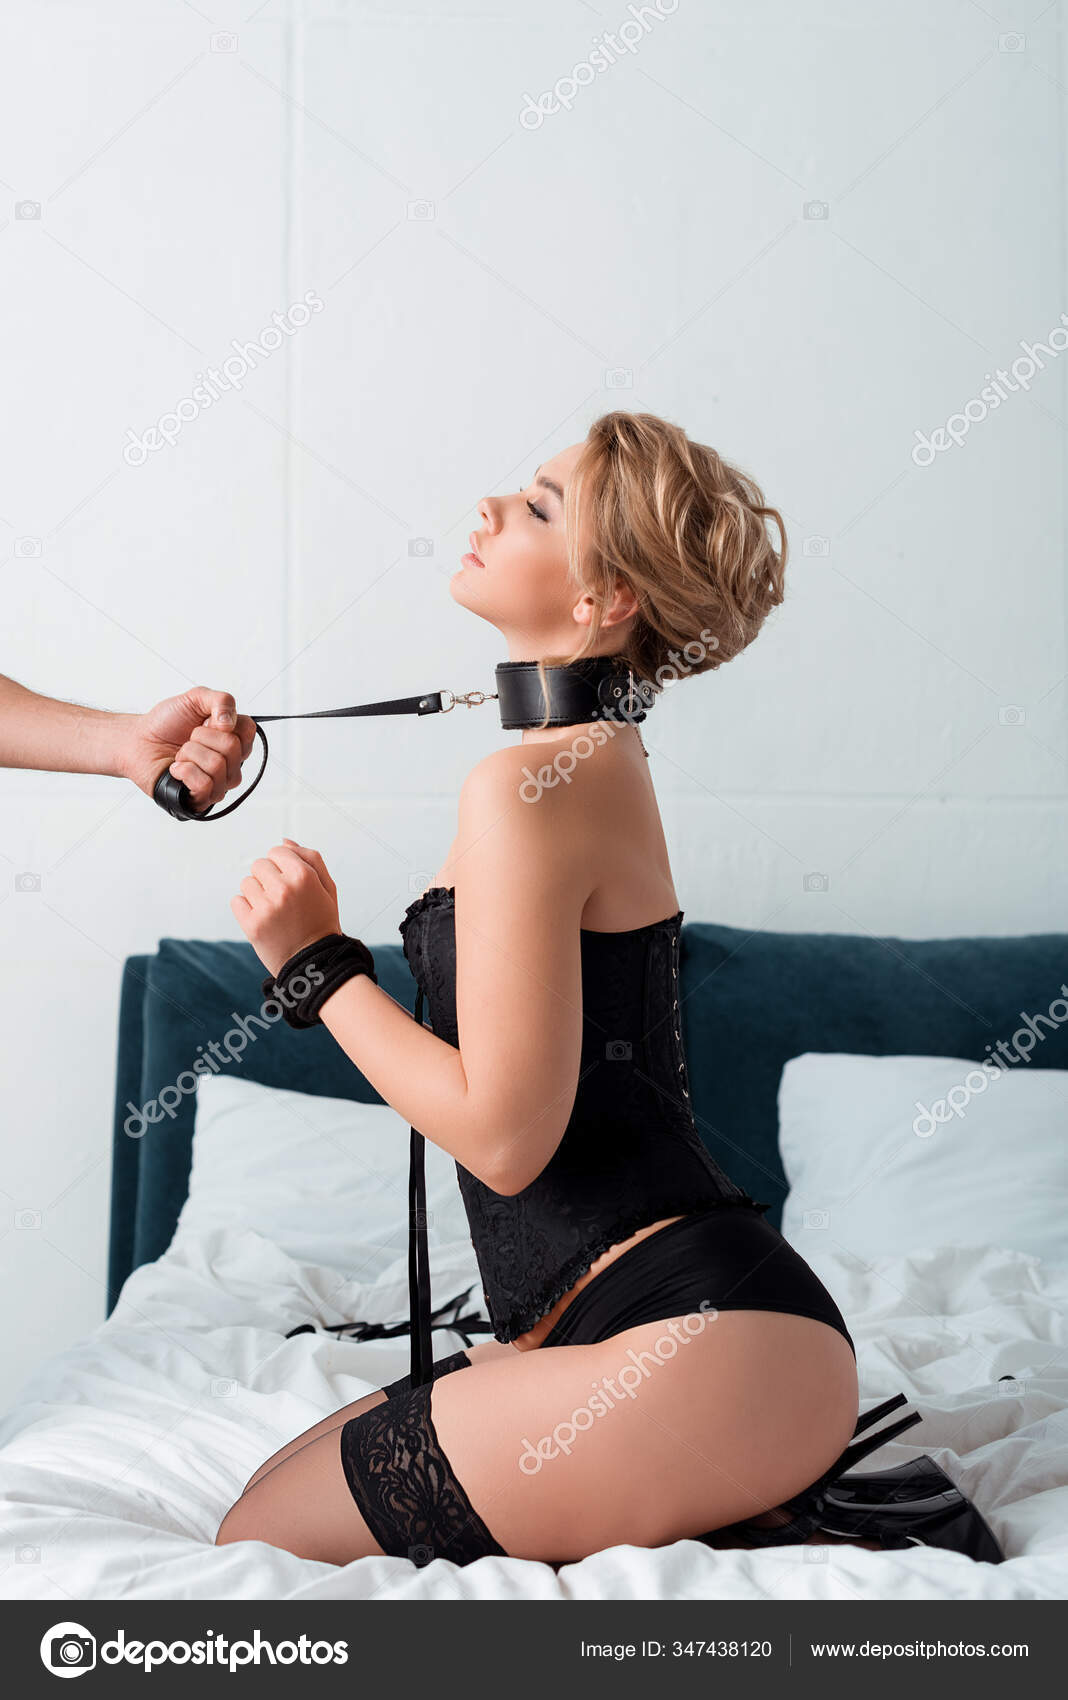 Submissive on leash